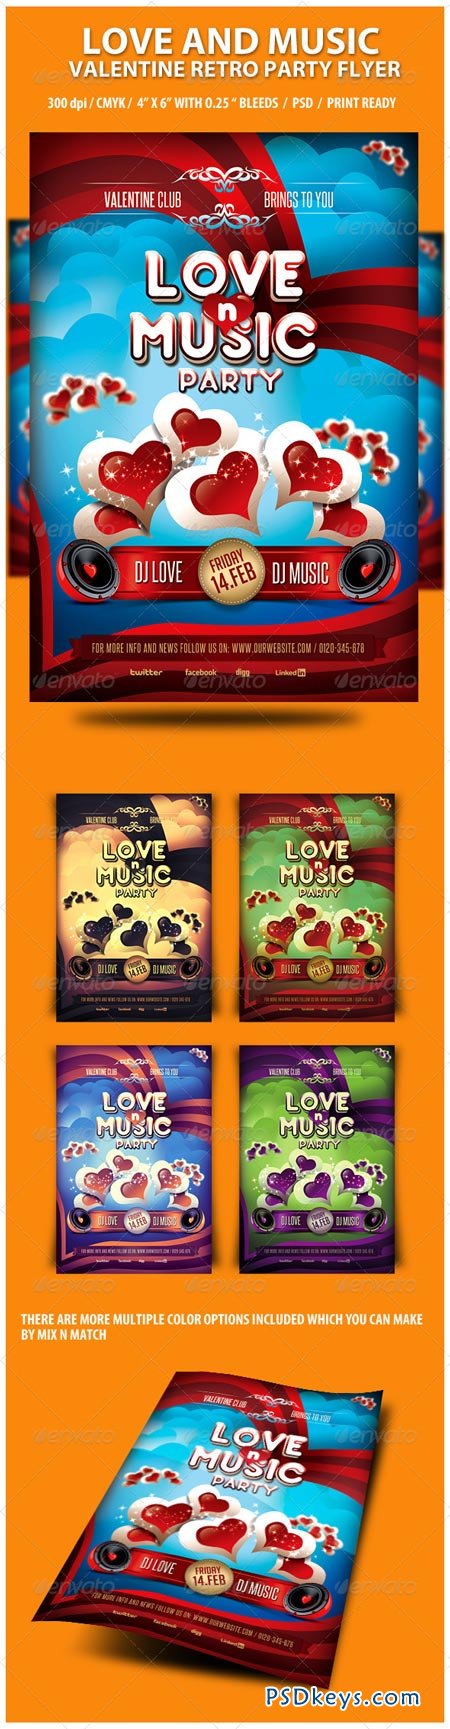 Love and Music Valentine Retro Party Flyer 3767883